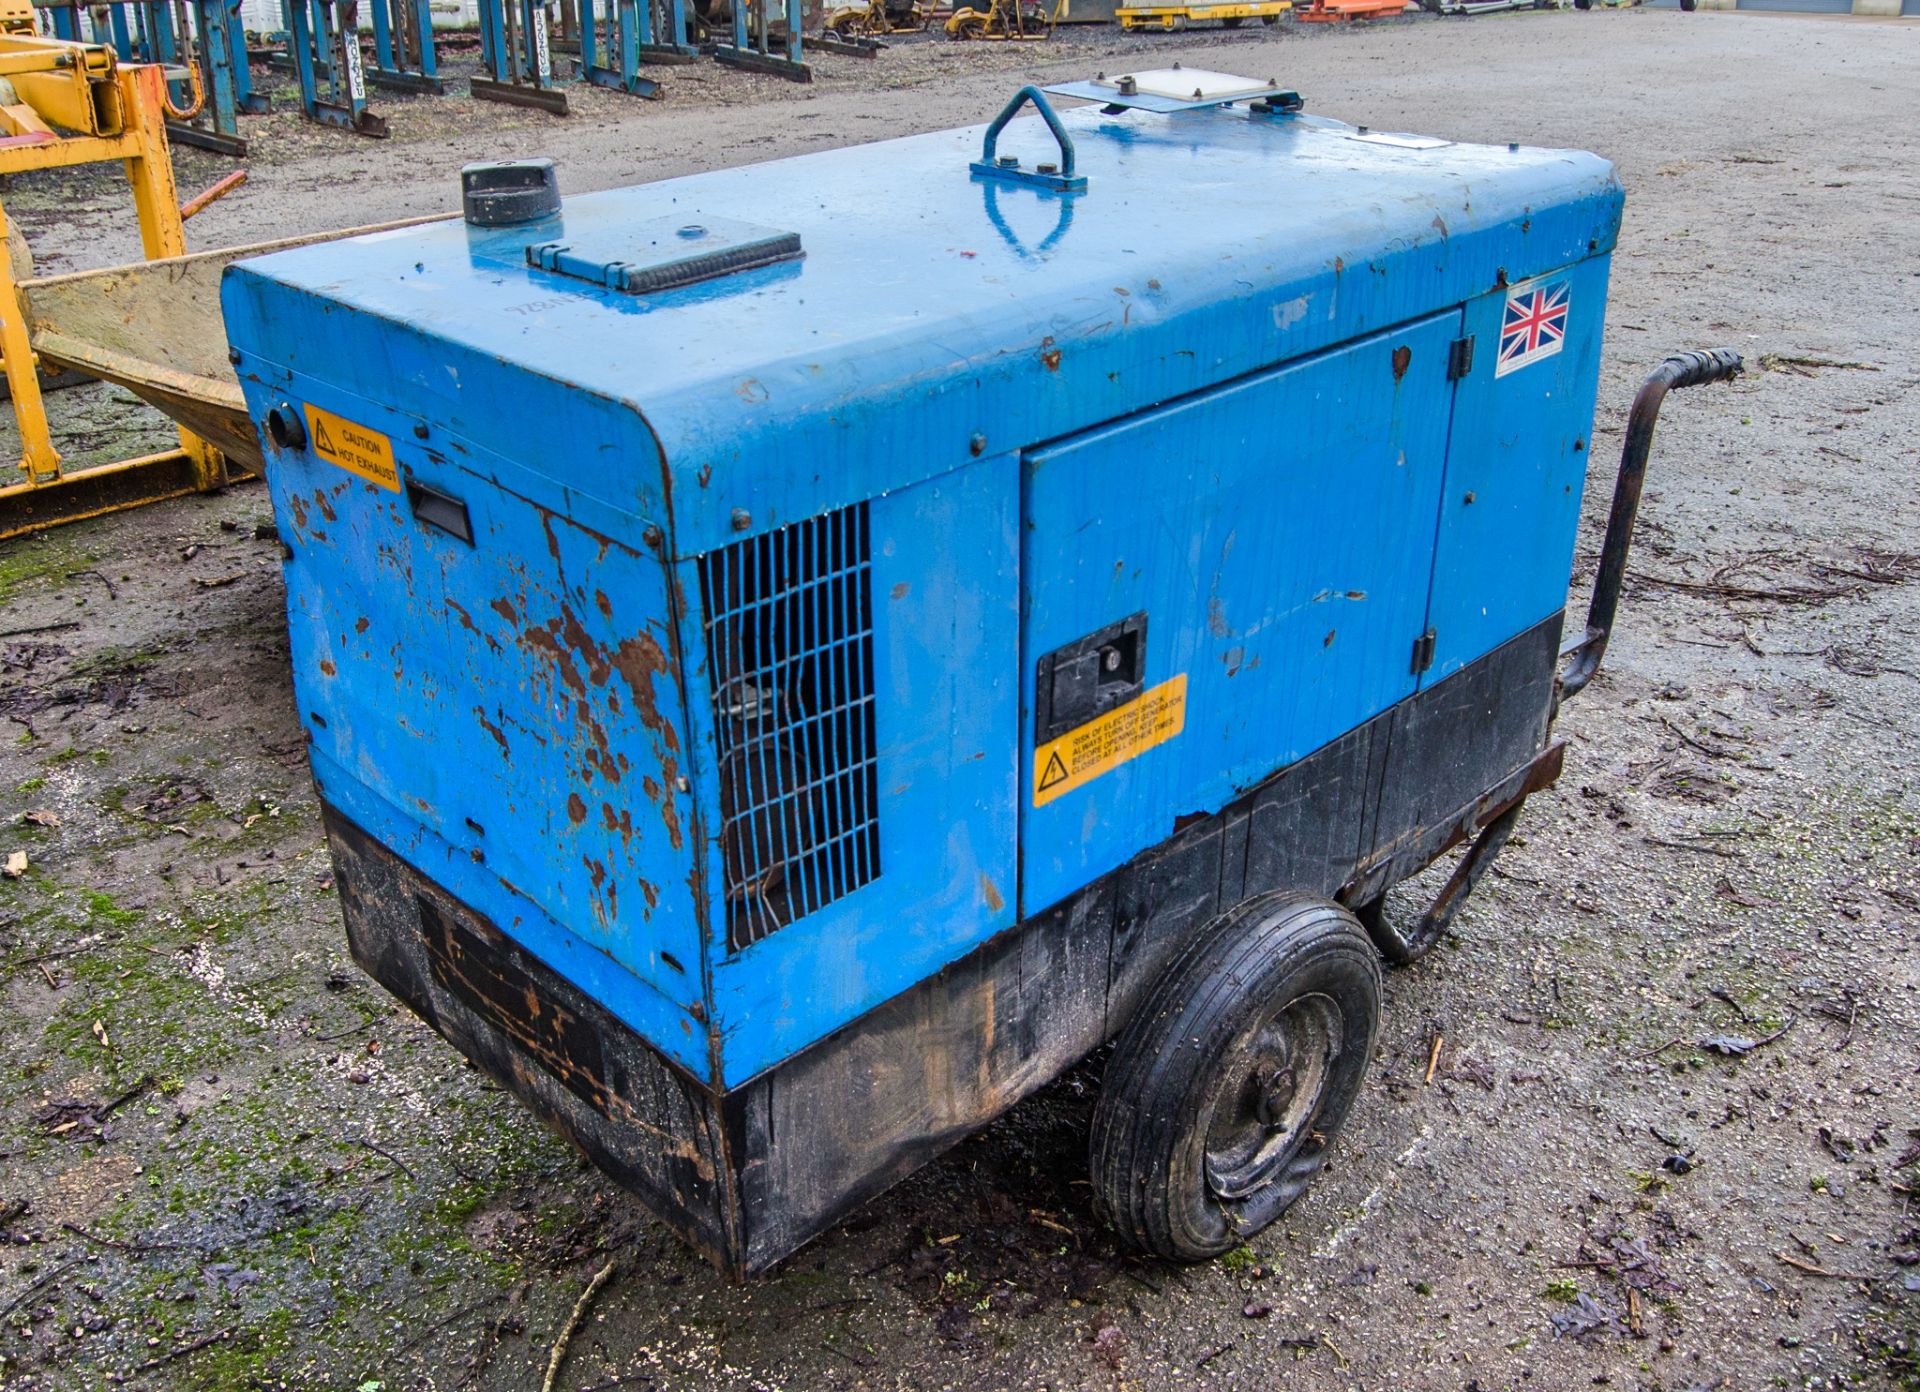 Stephill SSD1000 10 kva diesel driven generator S/N: 400704 Recorded Hours: 8147 GEN826 - Image 2 of 5